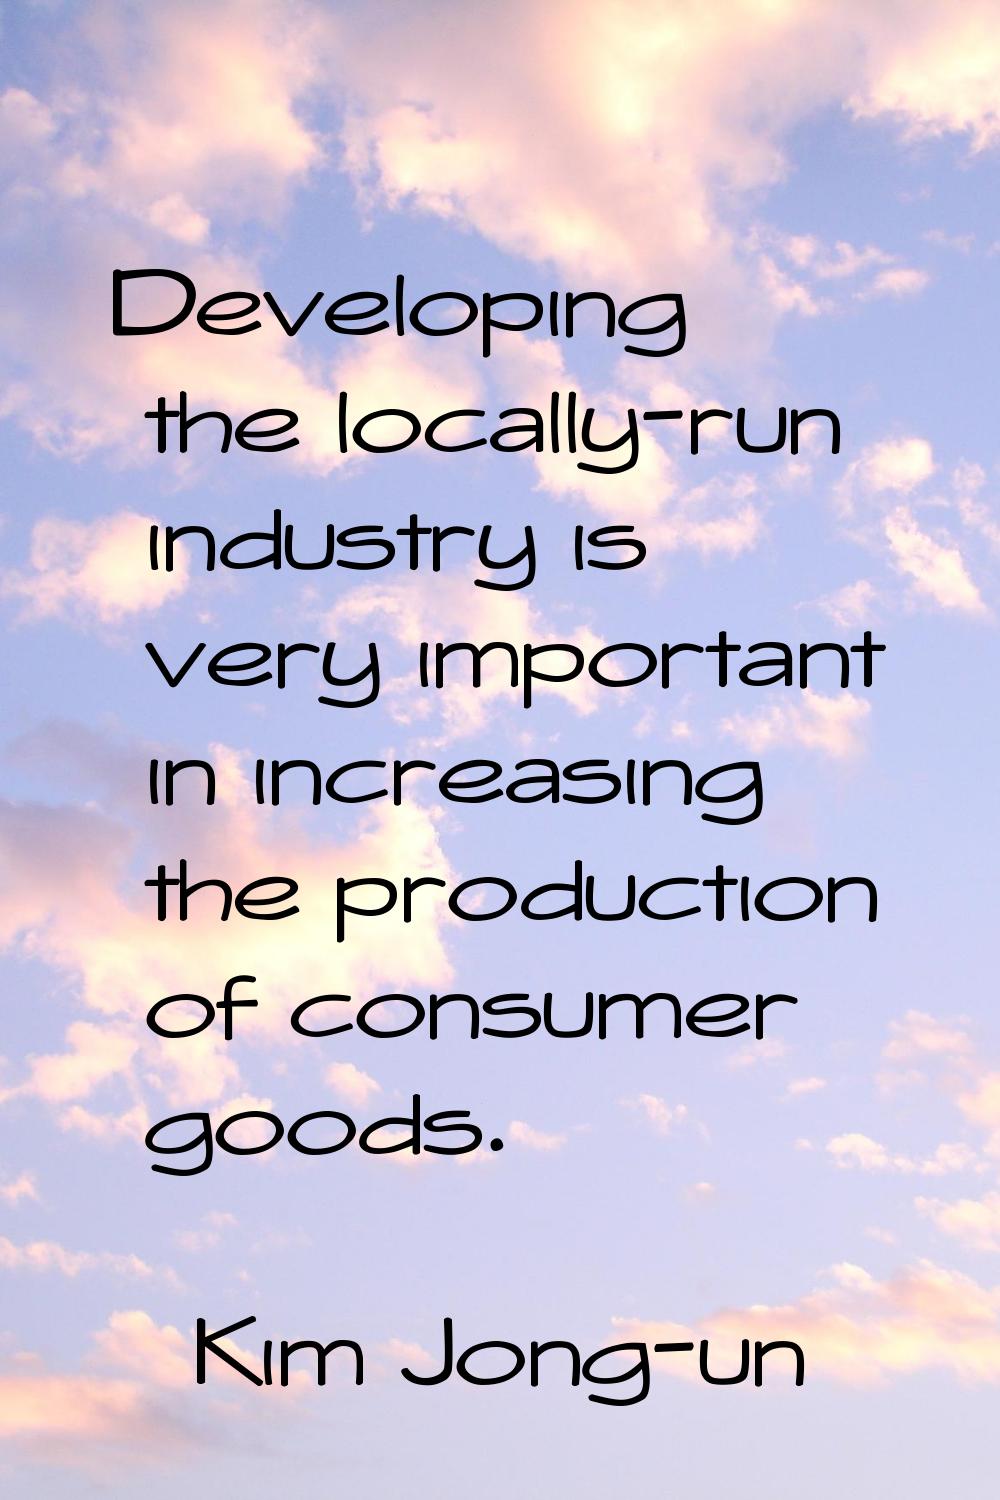 Developing the locally-run industry is very important in increasing the production of consumer good